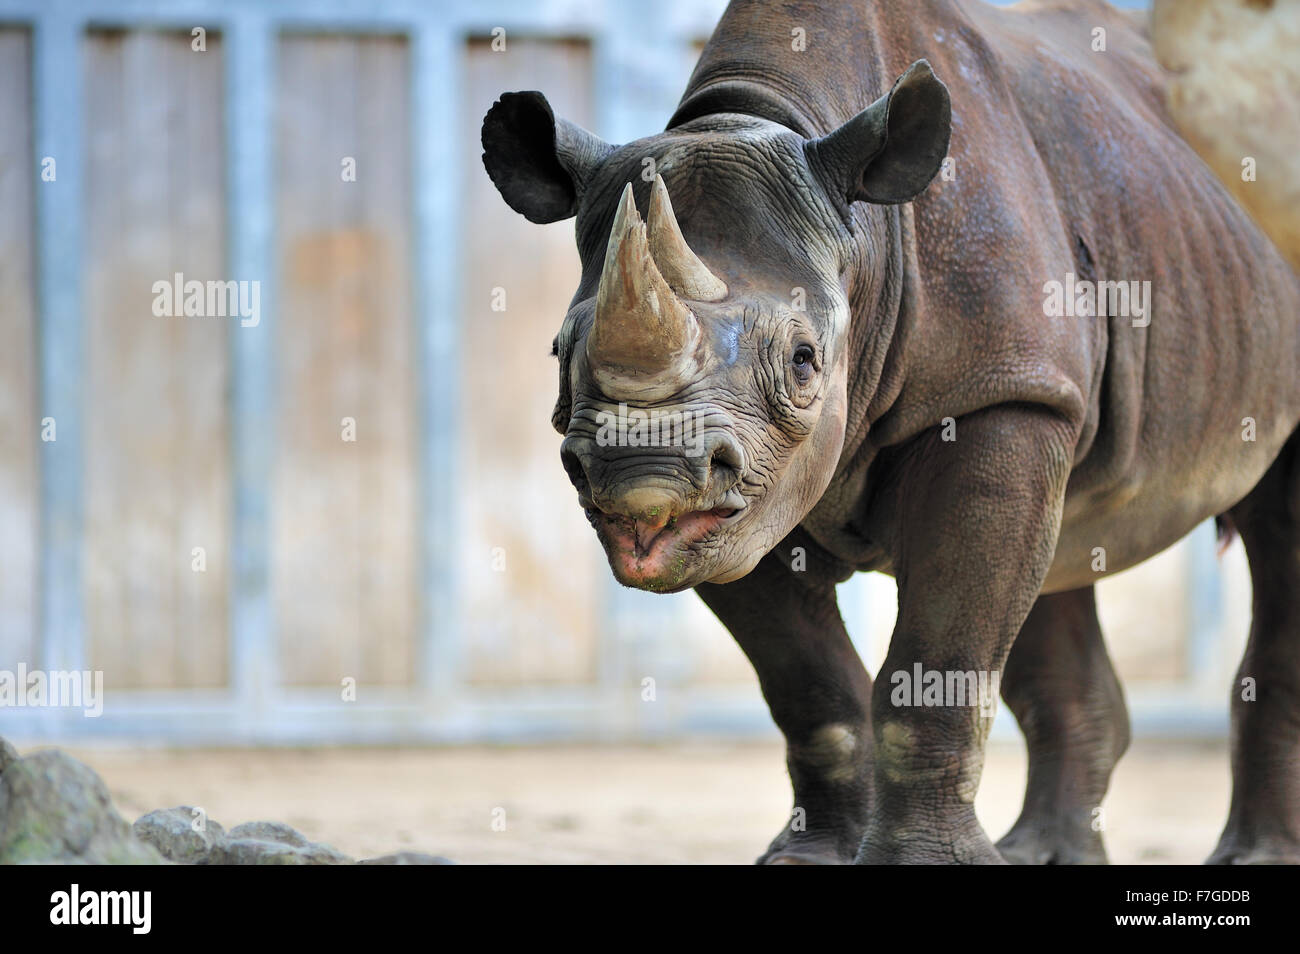 Lumbering around in its outdoor compound, a black rhinoceros gets some exercise at Chicago's Lincoln Park Zoo. Chicago, Illinois, USA. Stock Photo